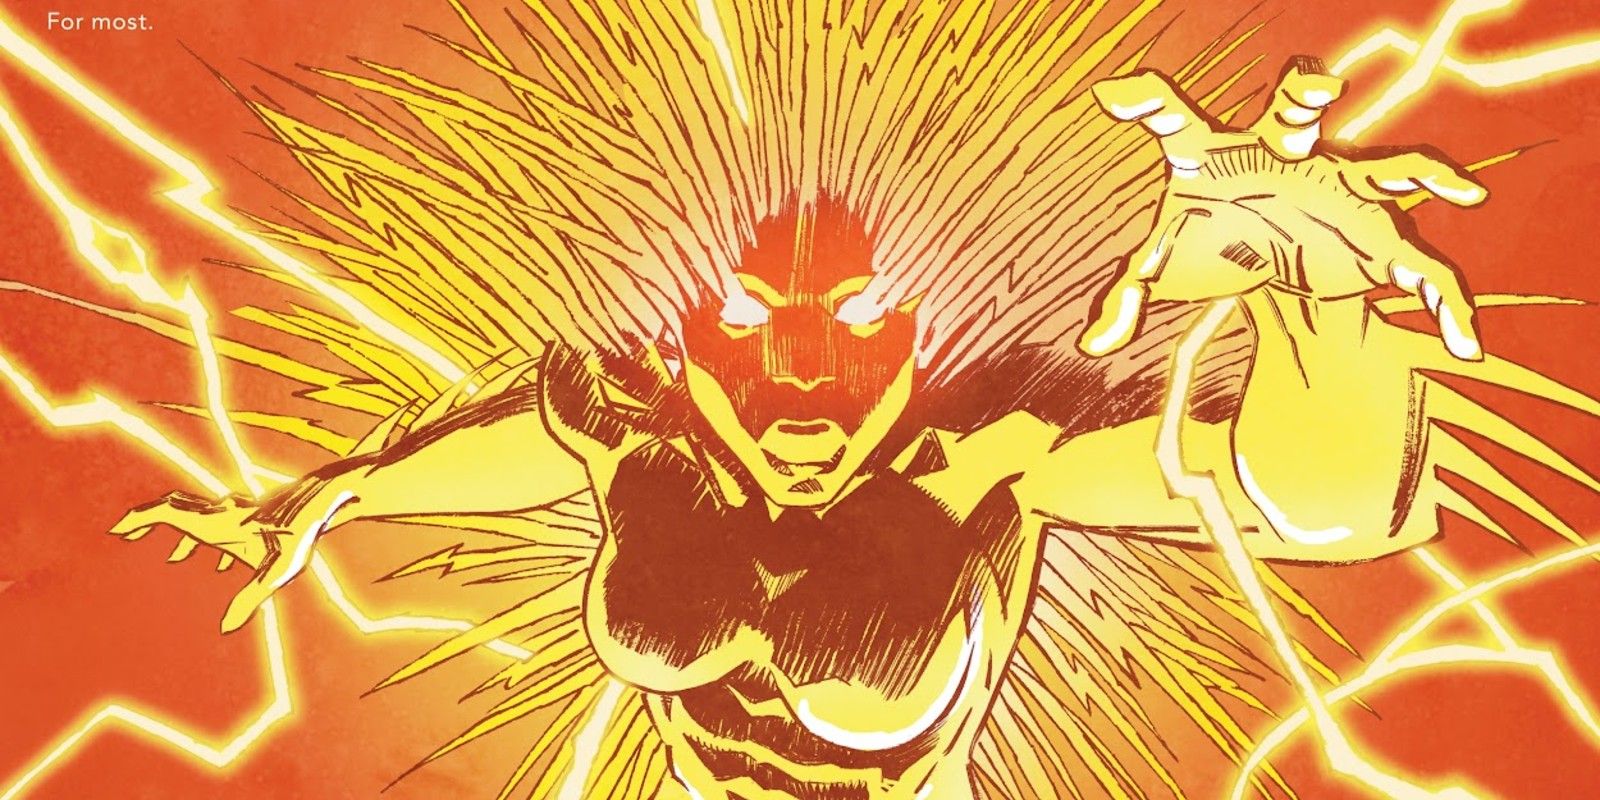 Lightning using her powers in the comics